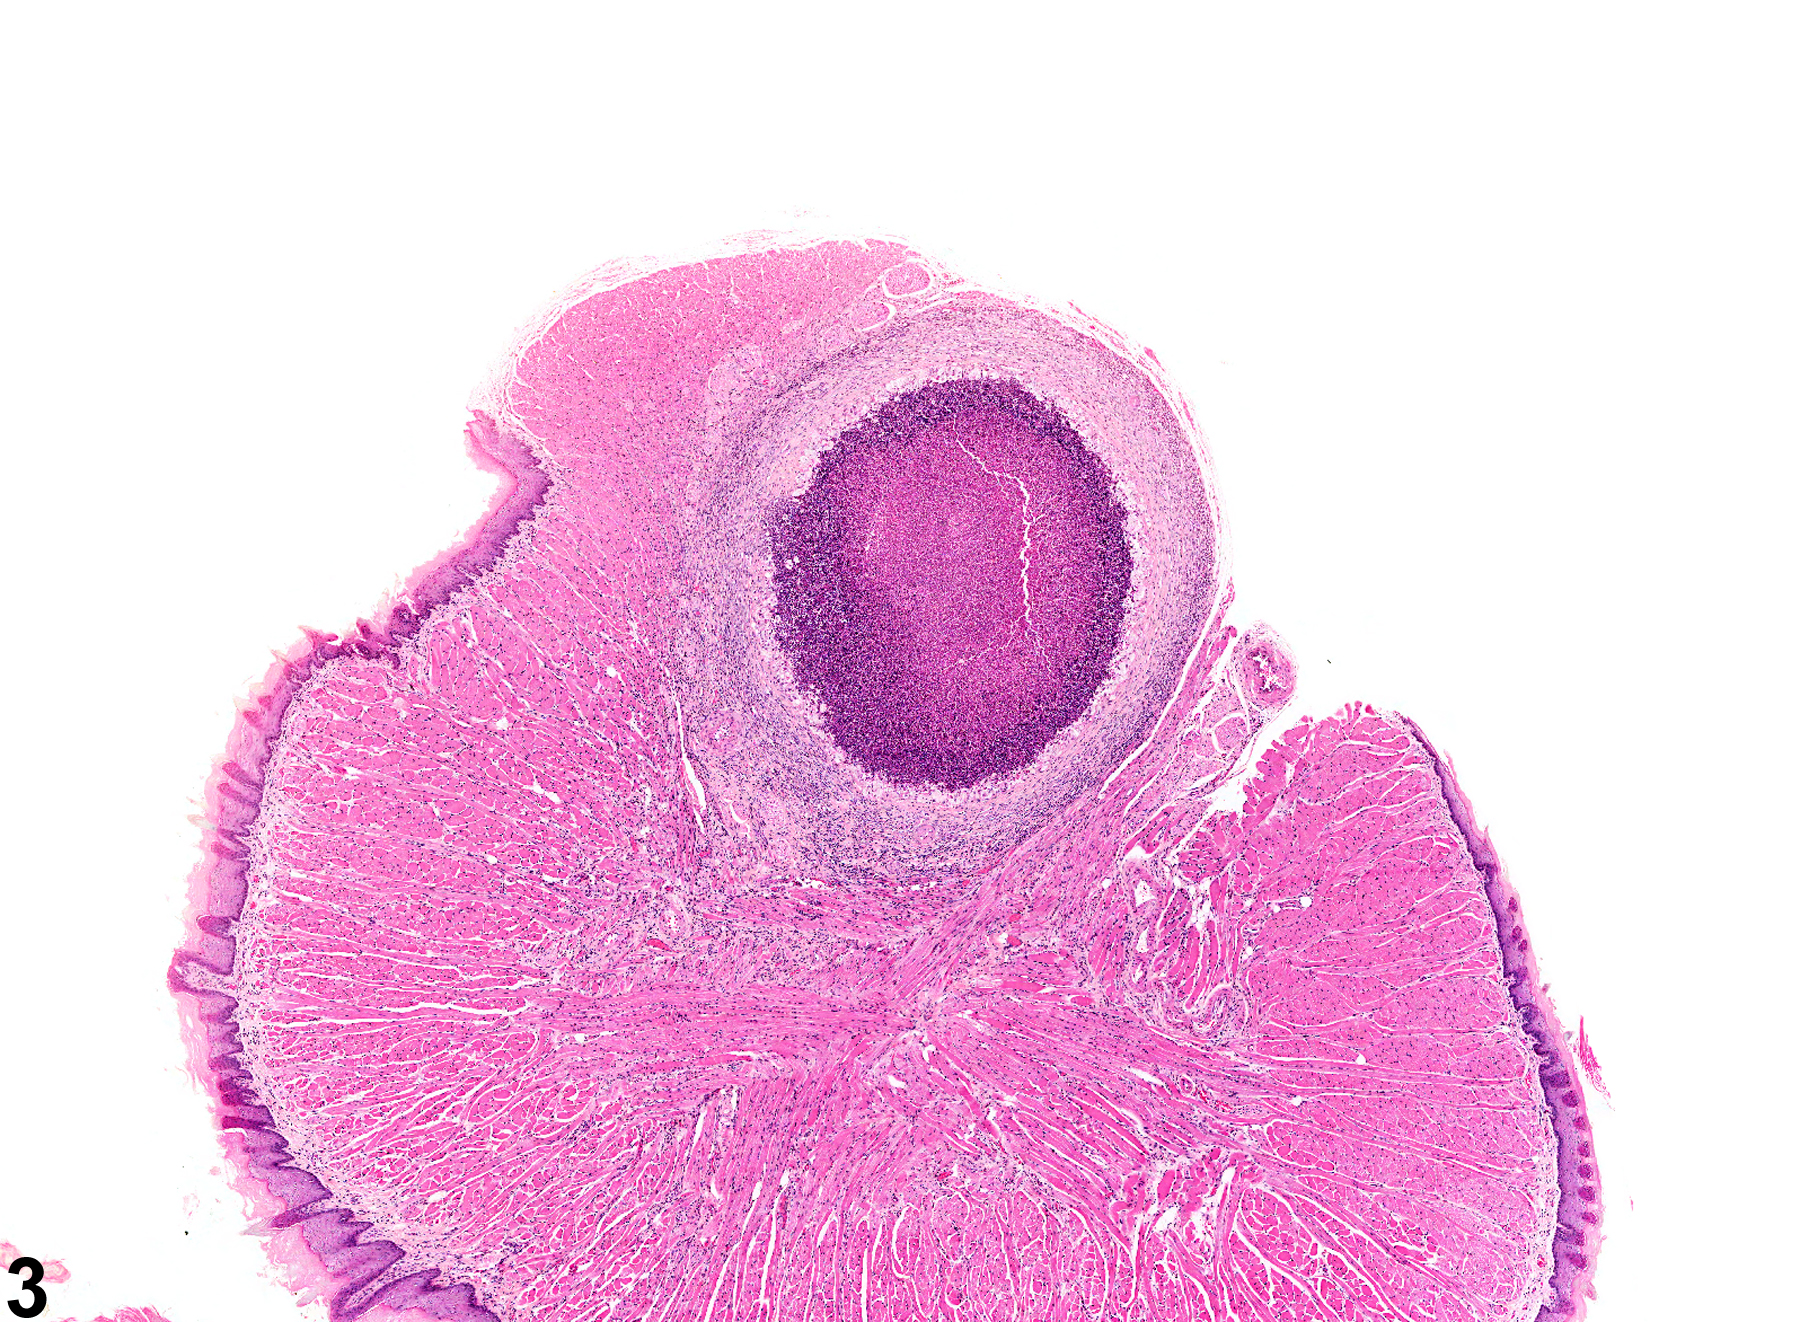 Image of inflammation in the tongue from a male F344/N rat in a chronic study